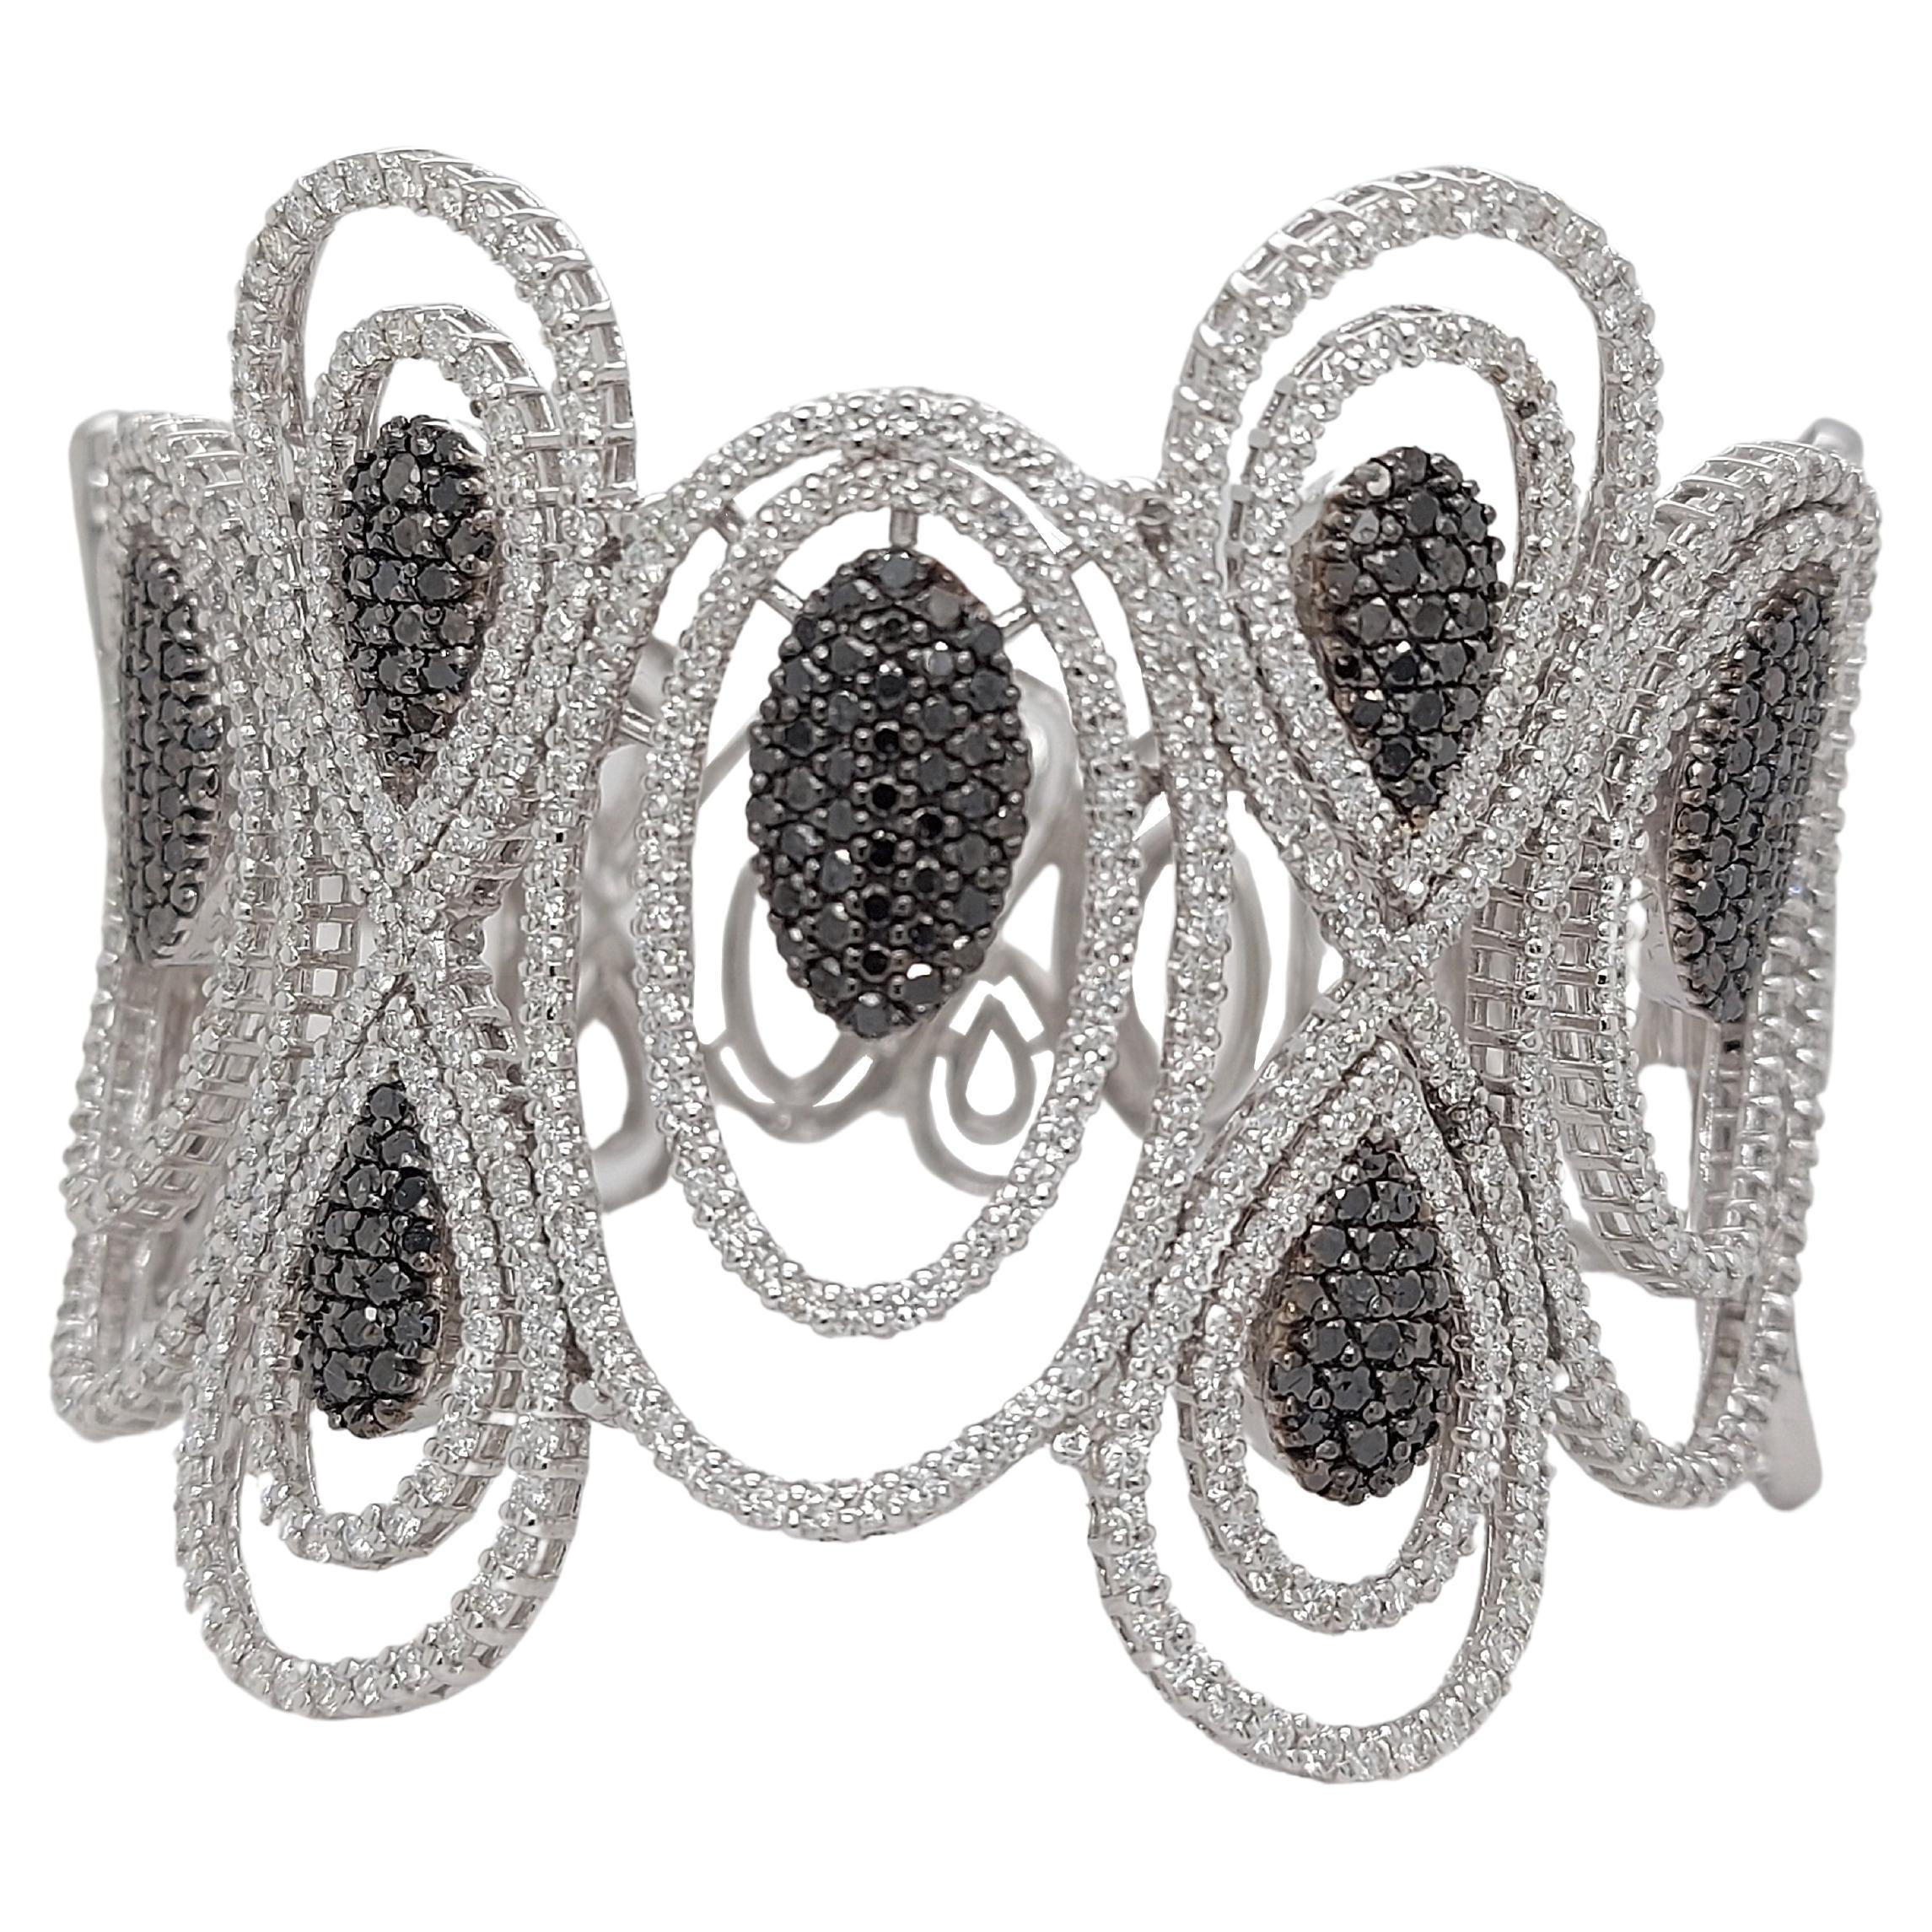 18kt White Gold Cuff Bracelet with 5.79ct Black and 8.12ct White Diamonds